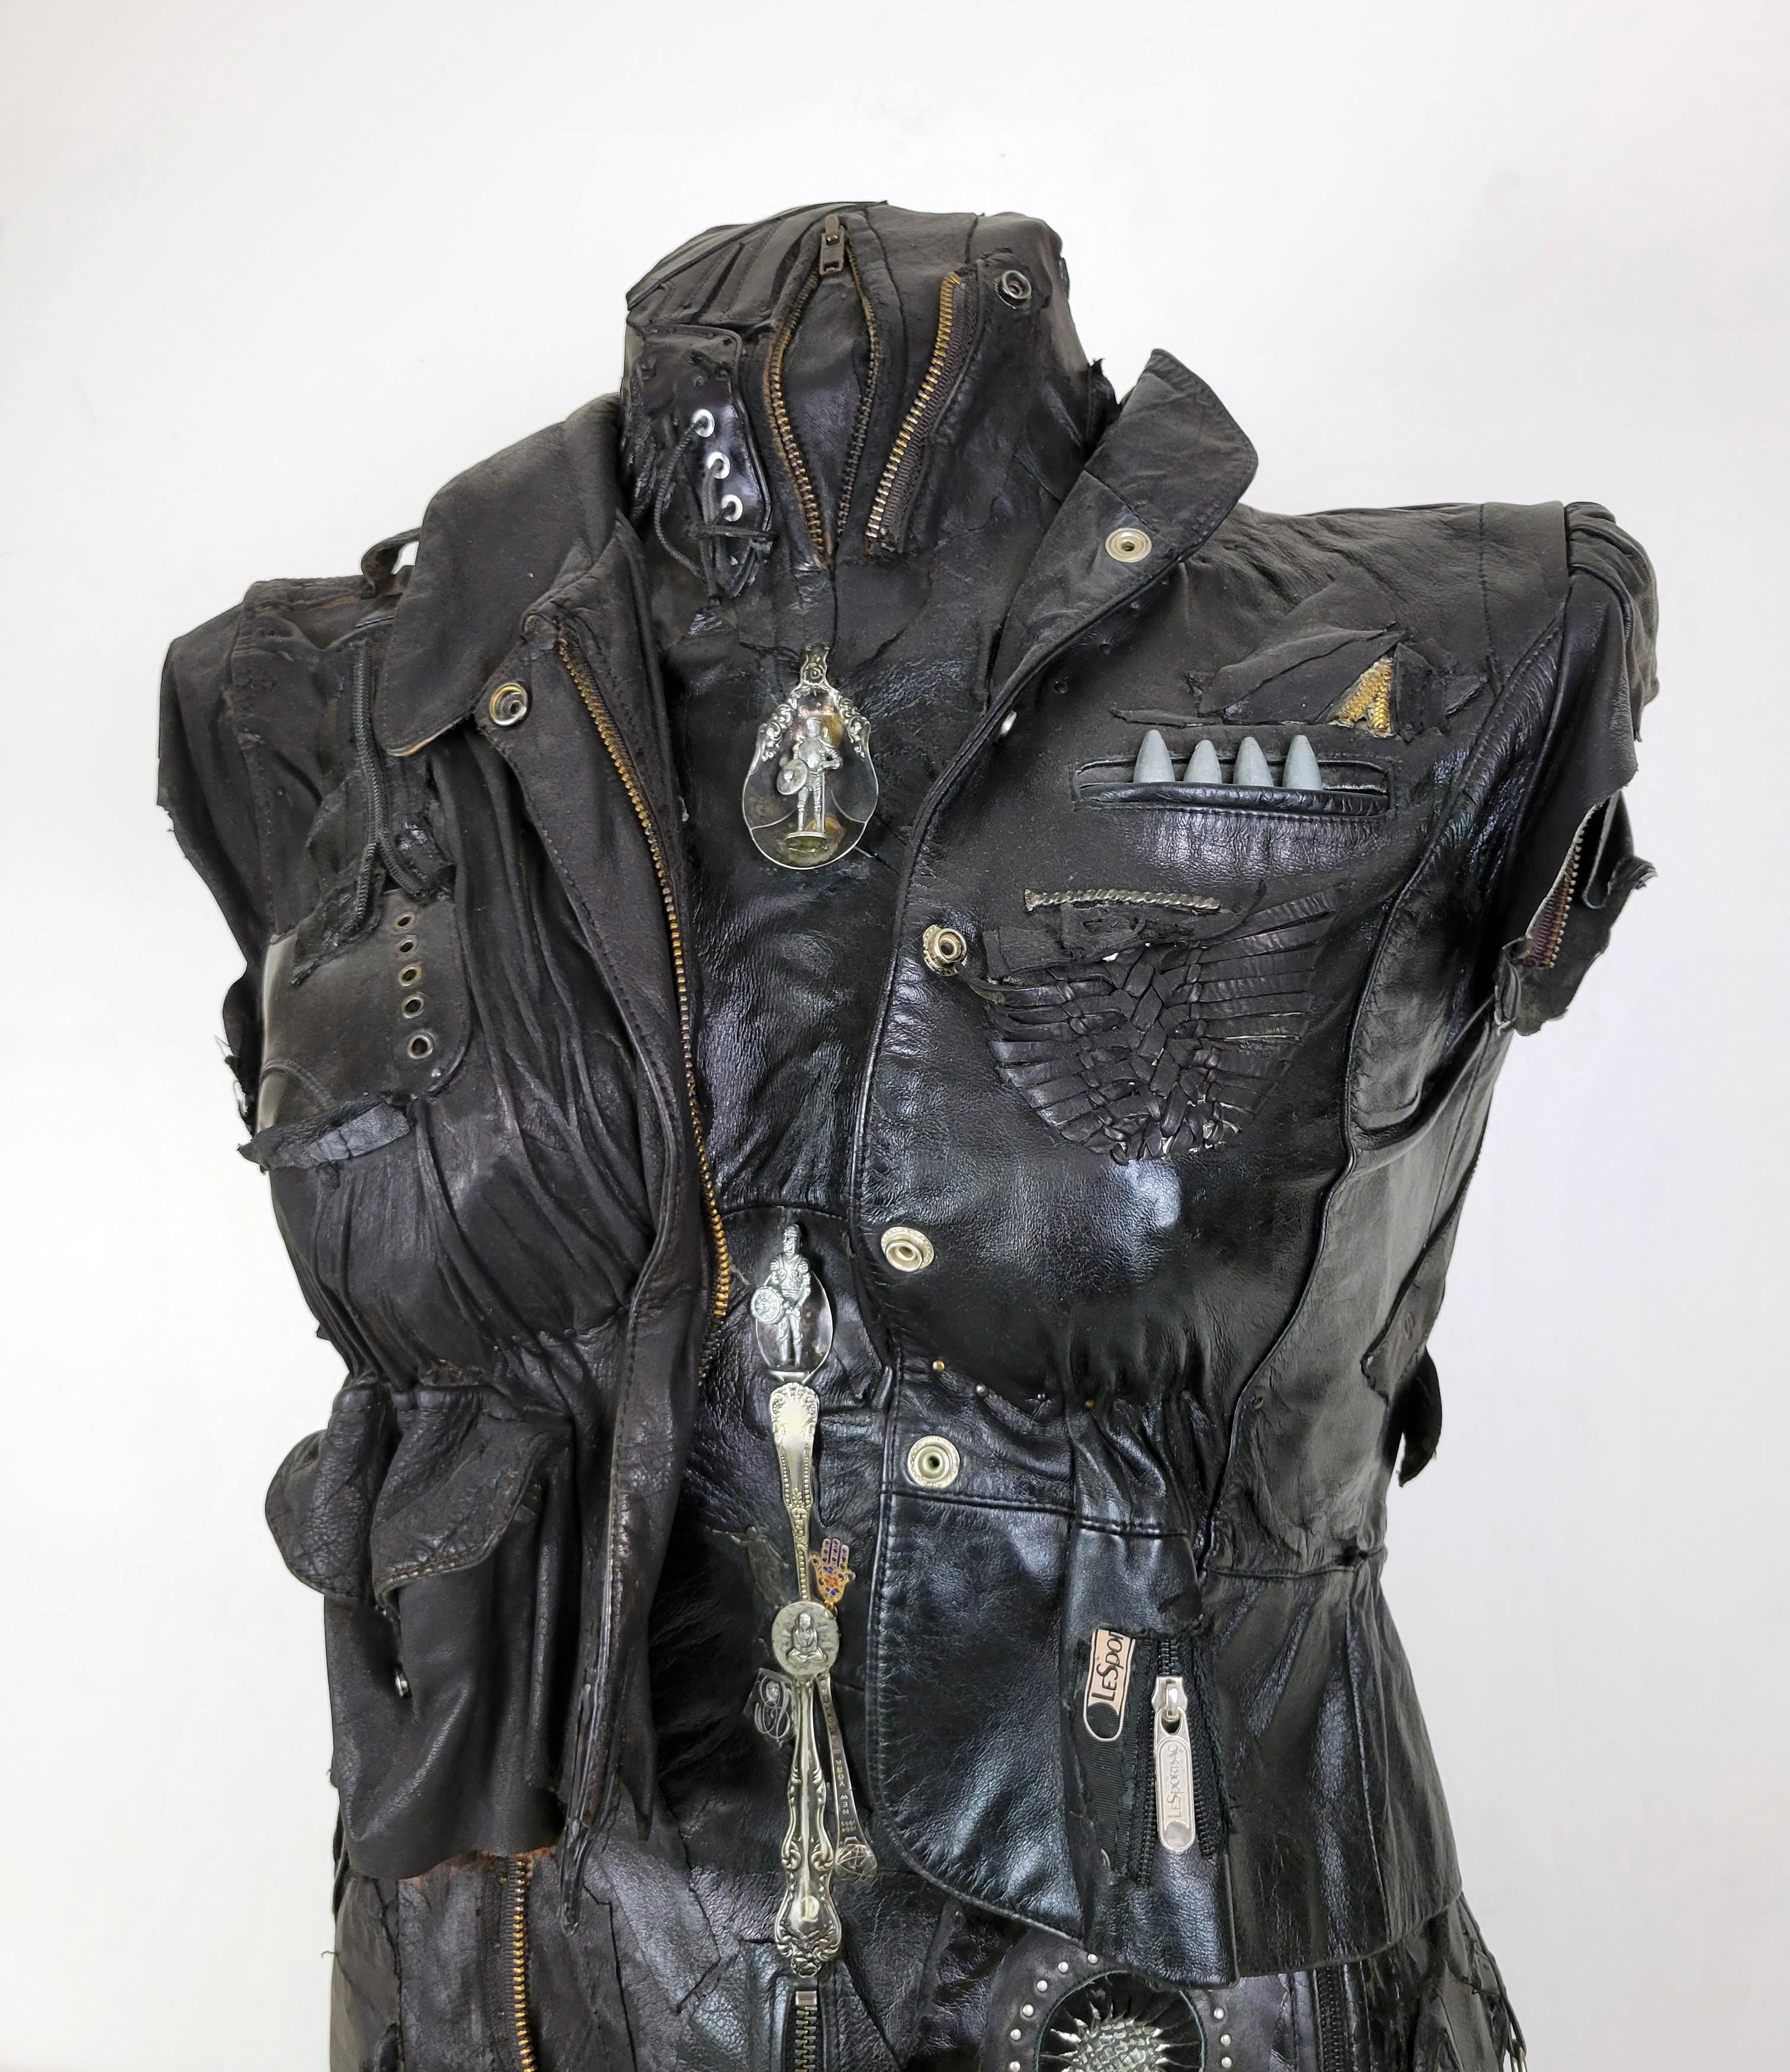 Feminist Contemporary Black/Silver Leather Metal Torso Sculpture - On Call 707 - Gray Figurative Sculpture by Linda Stein